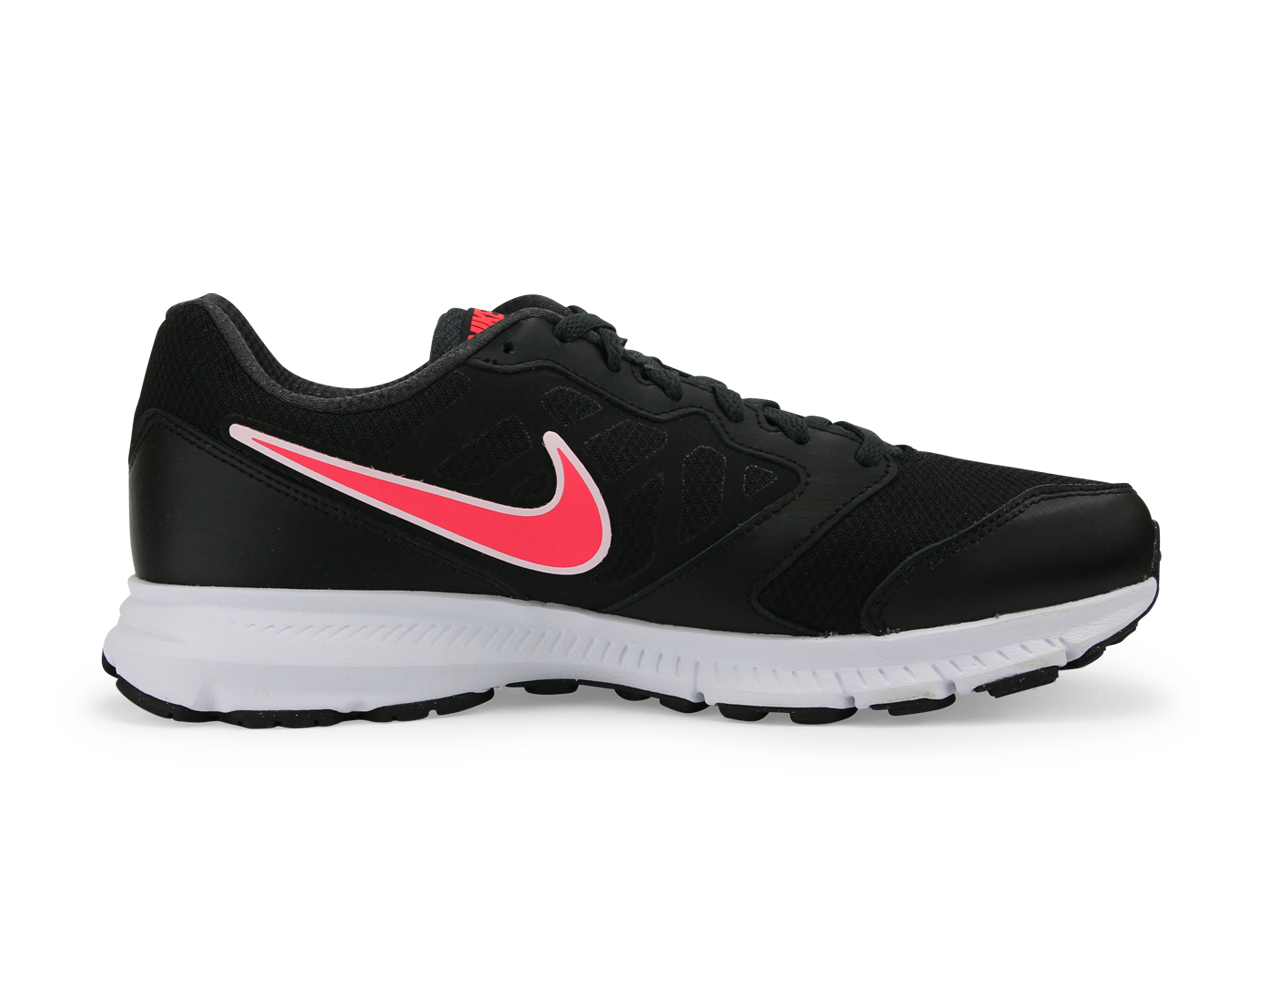 Nike Women's DownShifter 6 Running Shoes Black/Hyper Punch/Anthracite